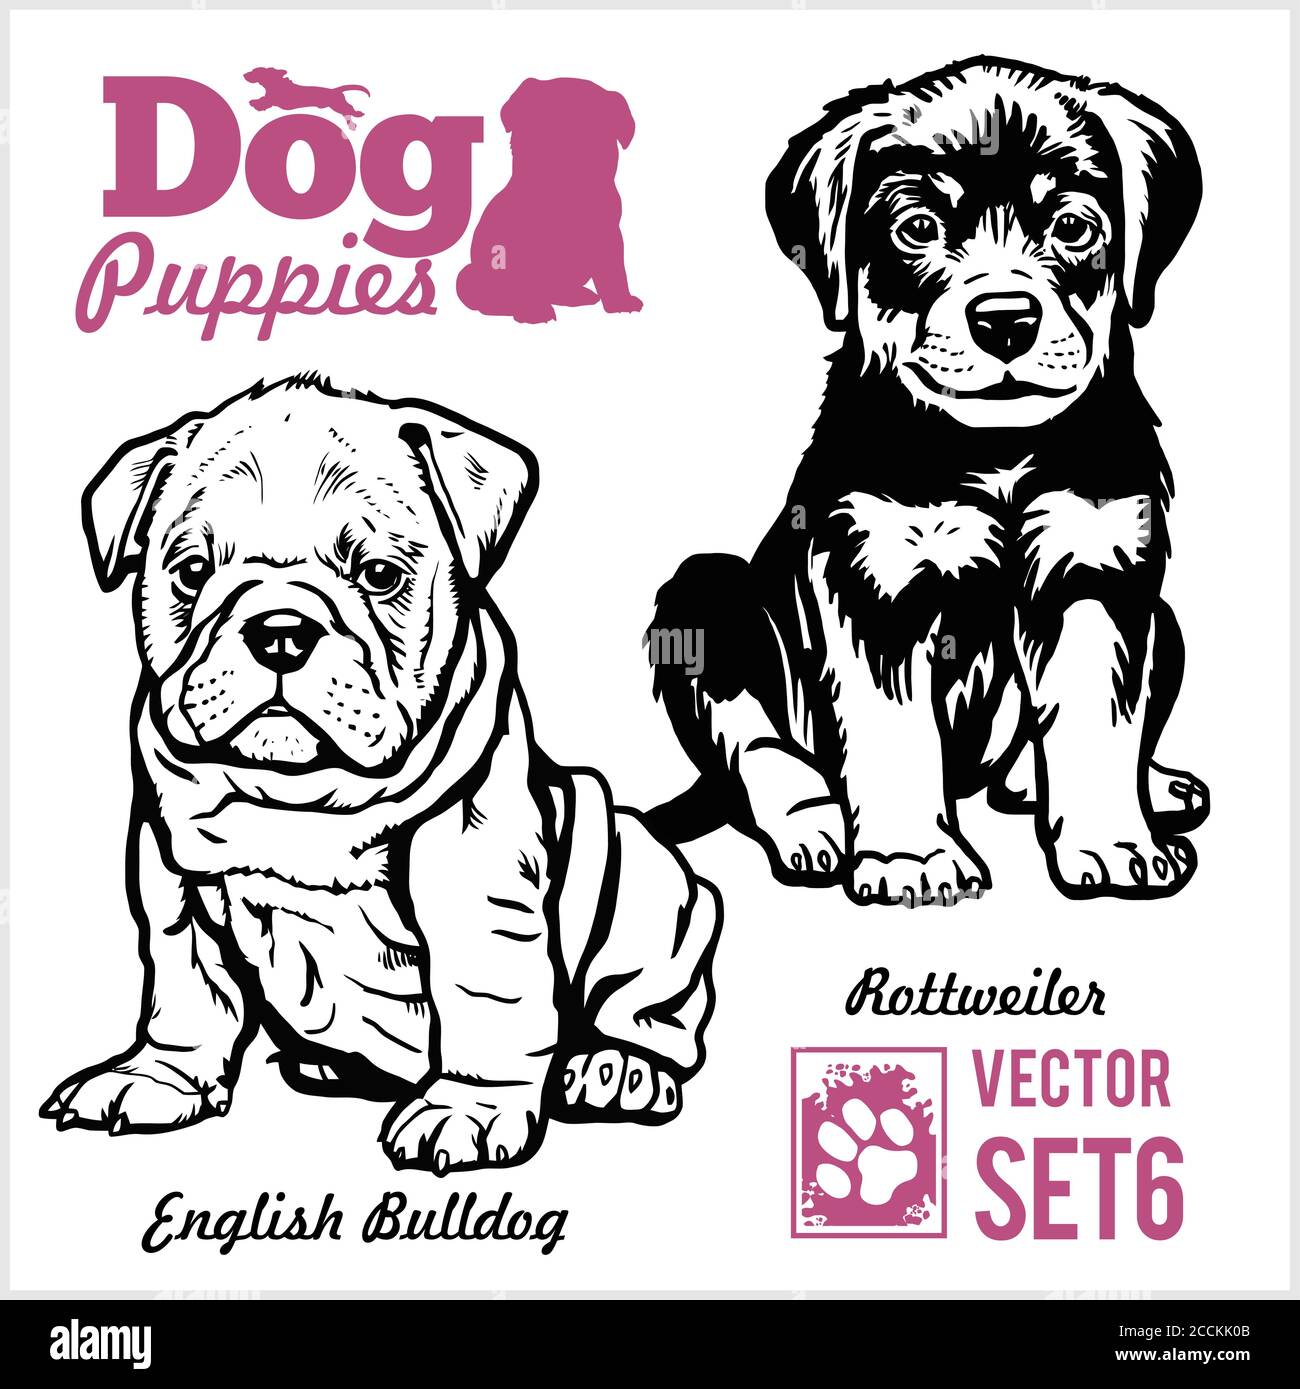 English Bulldog and Rottweiler - Dog Puppies. Vector set. Funny dogs puppy pet characters different breads doggy illustration isolated on white. Stock Vector